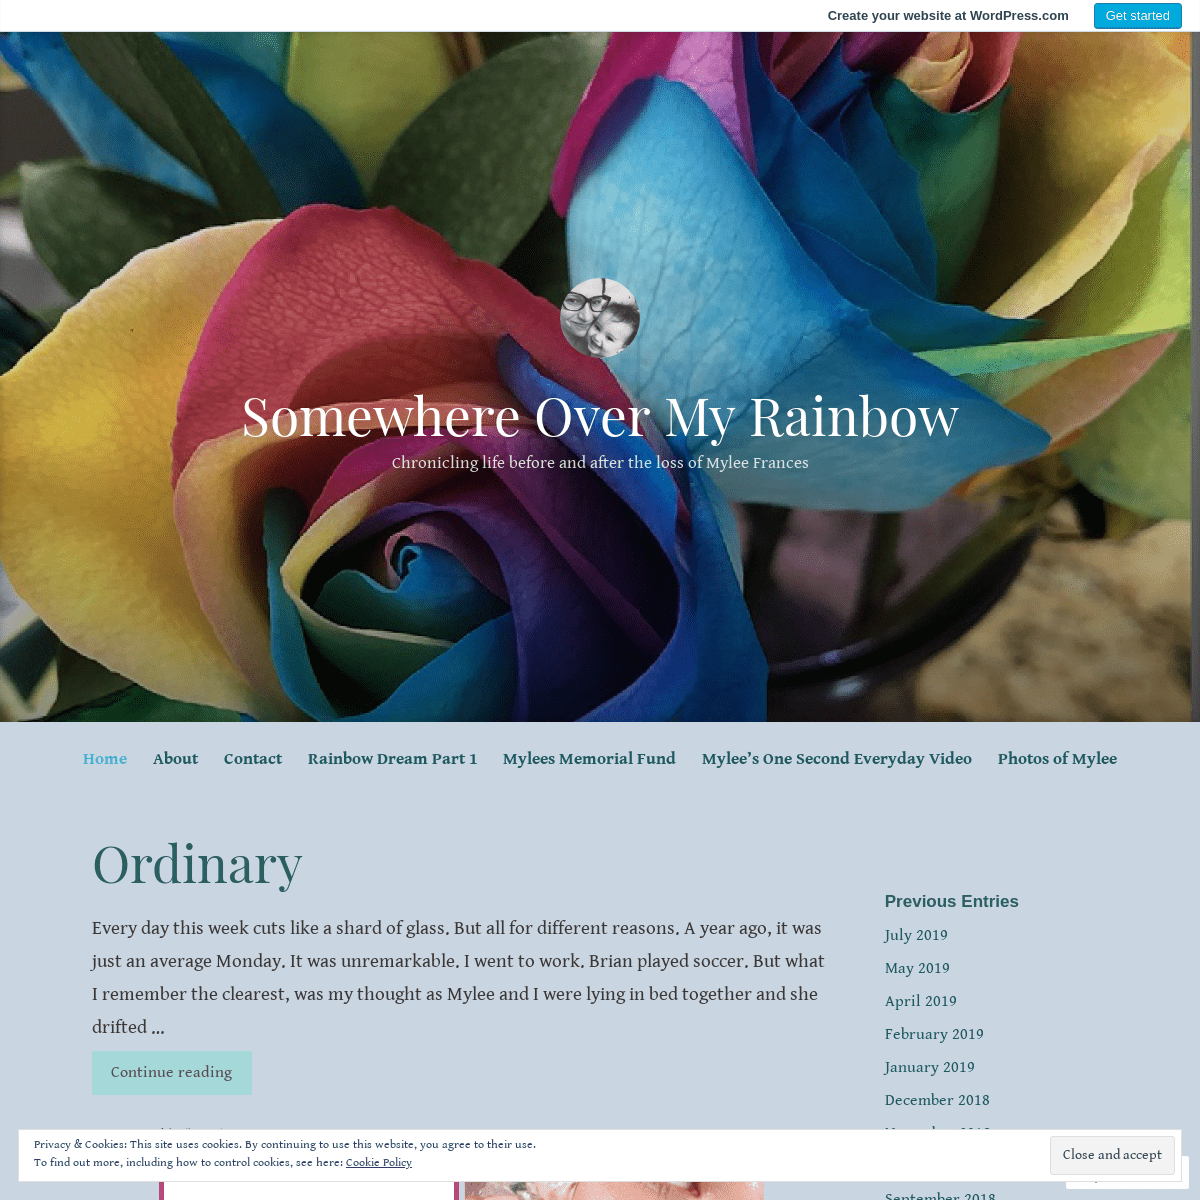 Somewhere Over My Rainbow – Chronicling life before and after the loss of Mylee Frances